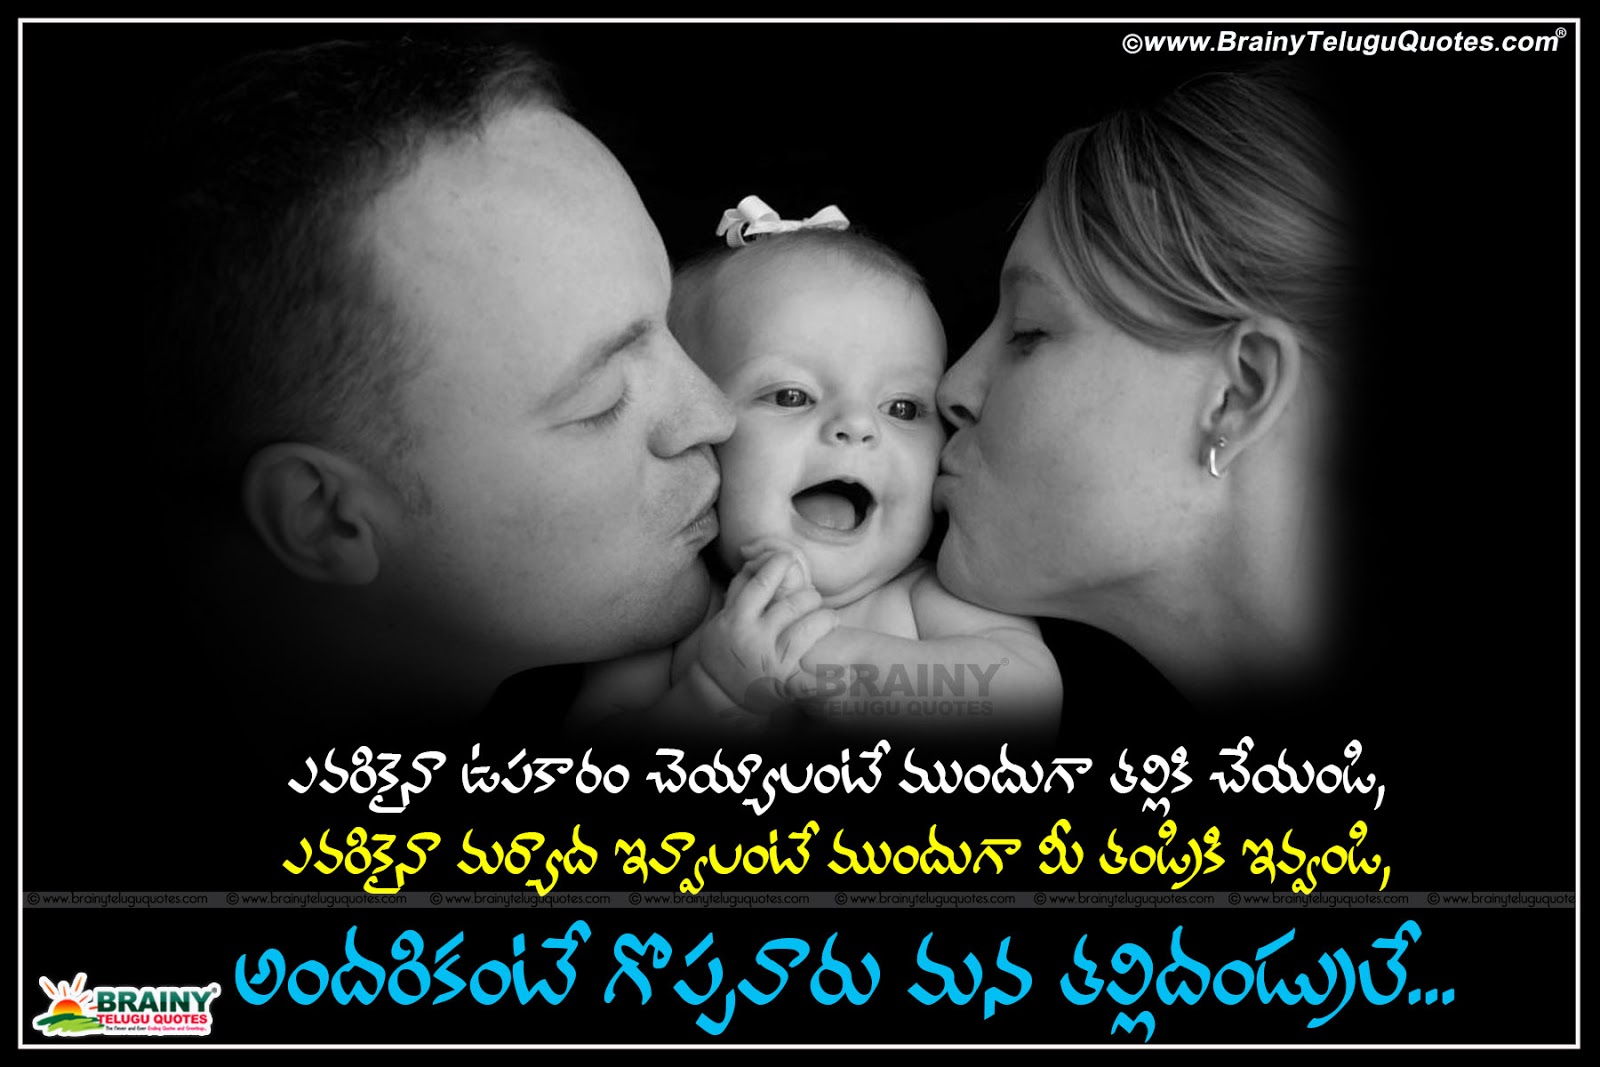 Best Telugu Inspiring Words For Teenagers For Parents With Father Mother Hd Images Brainyteluguquotes Comtelugu Quotes English Quotes Hindi Quotes Tamil Quotes Greetings